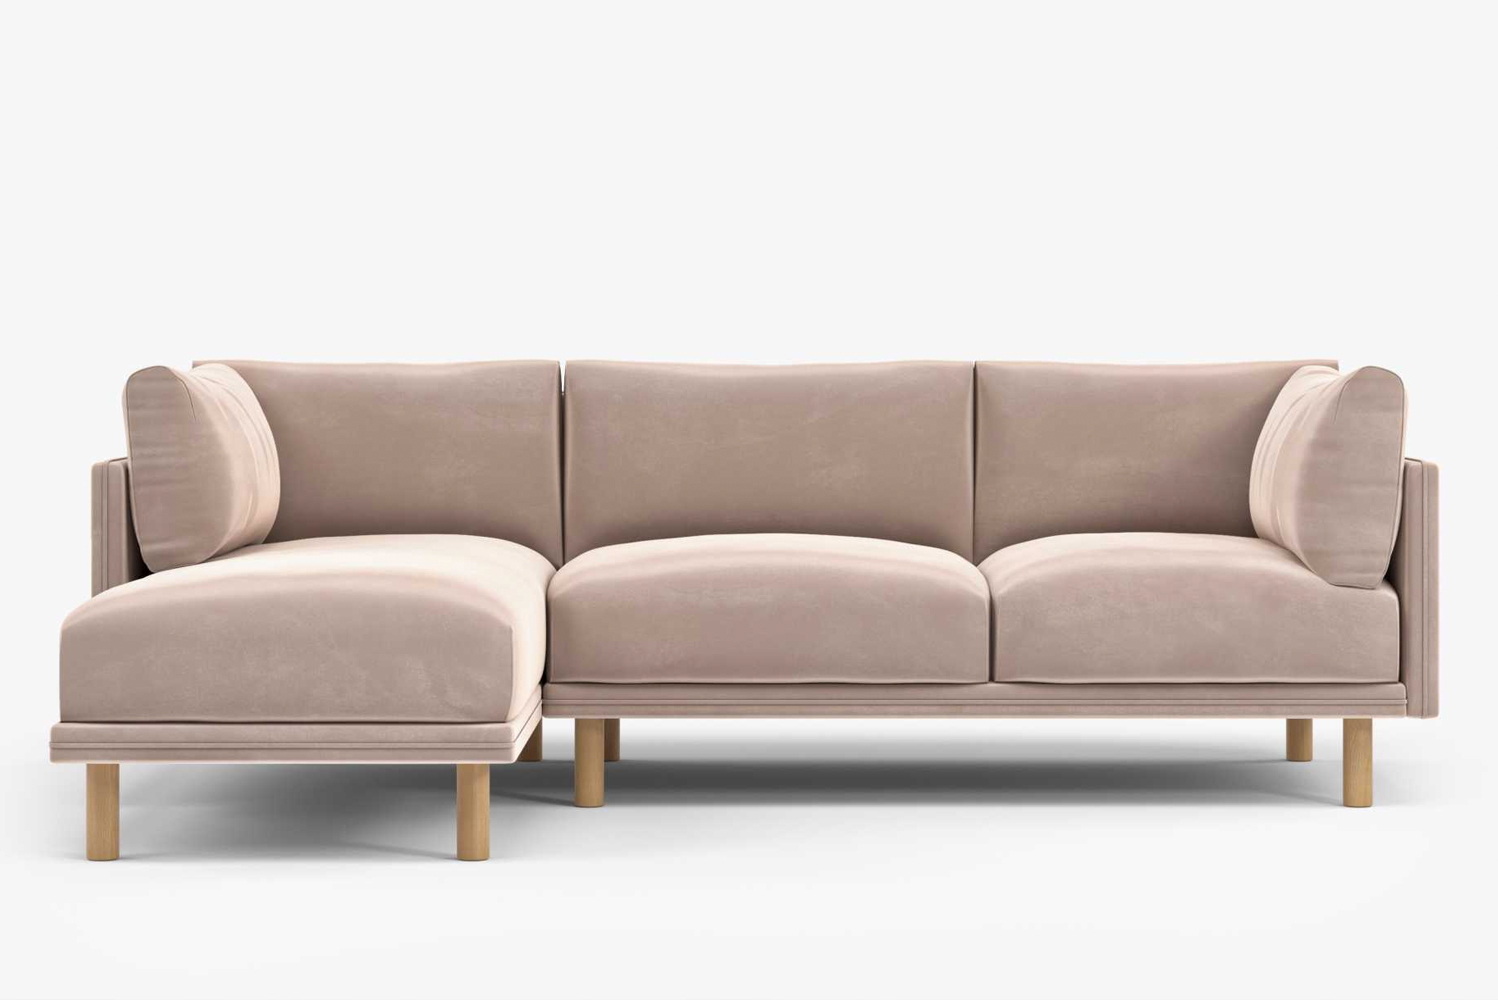 Rove Concepts launched Anderson a traditional sectional with subtle Nordic whimsy 